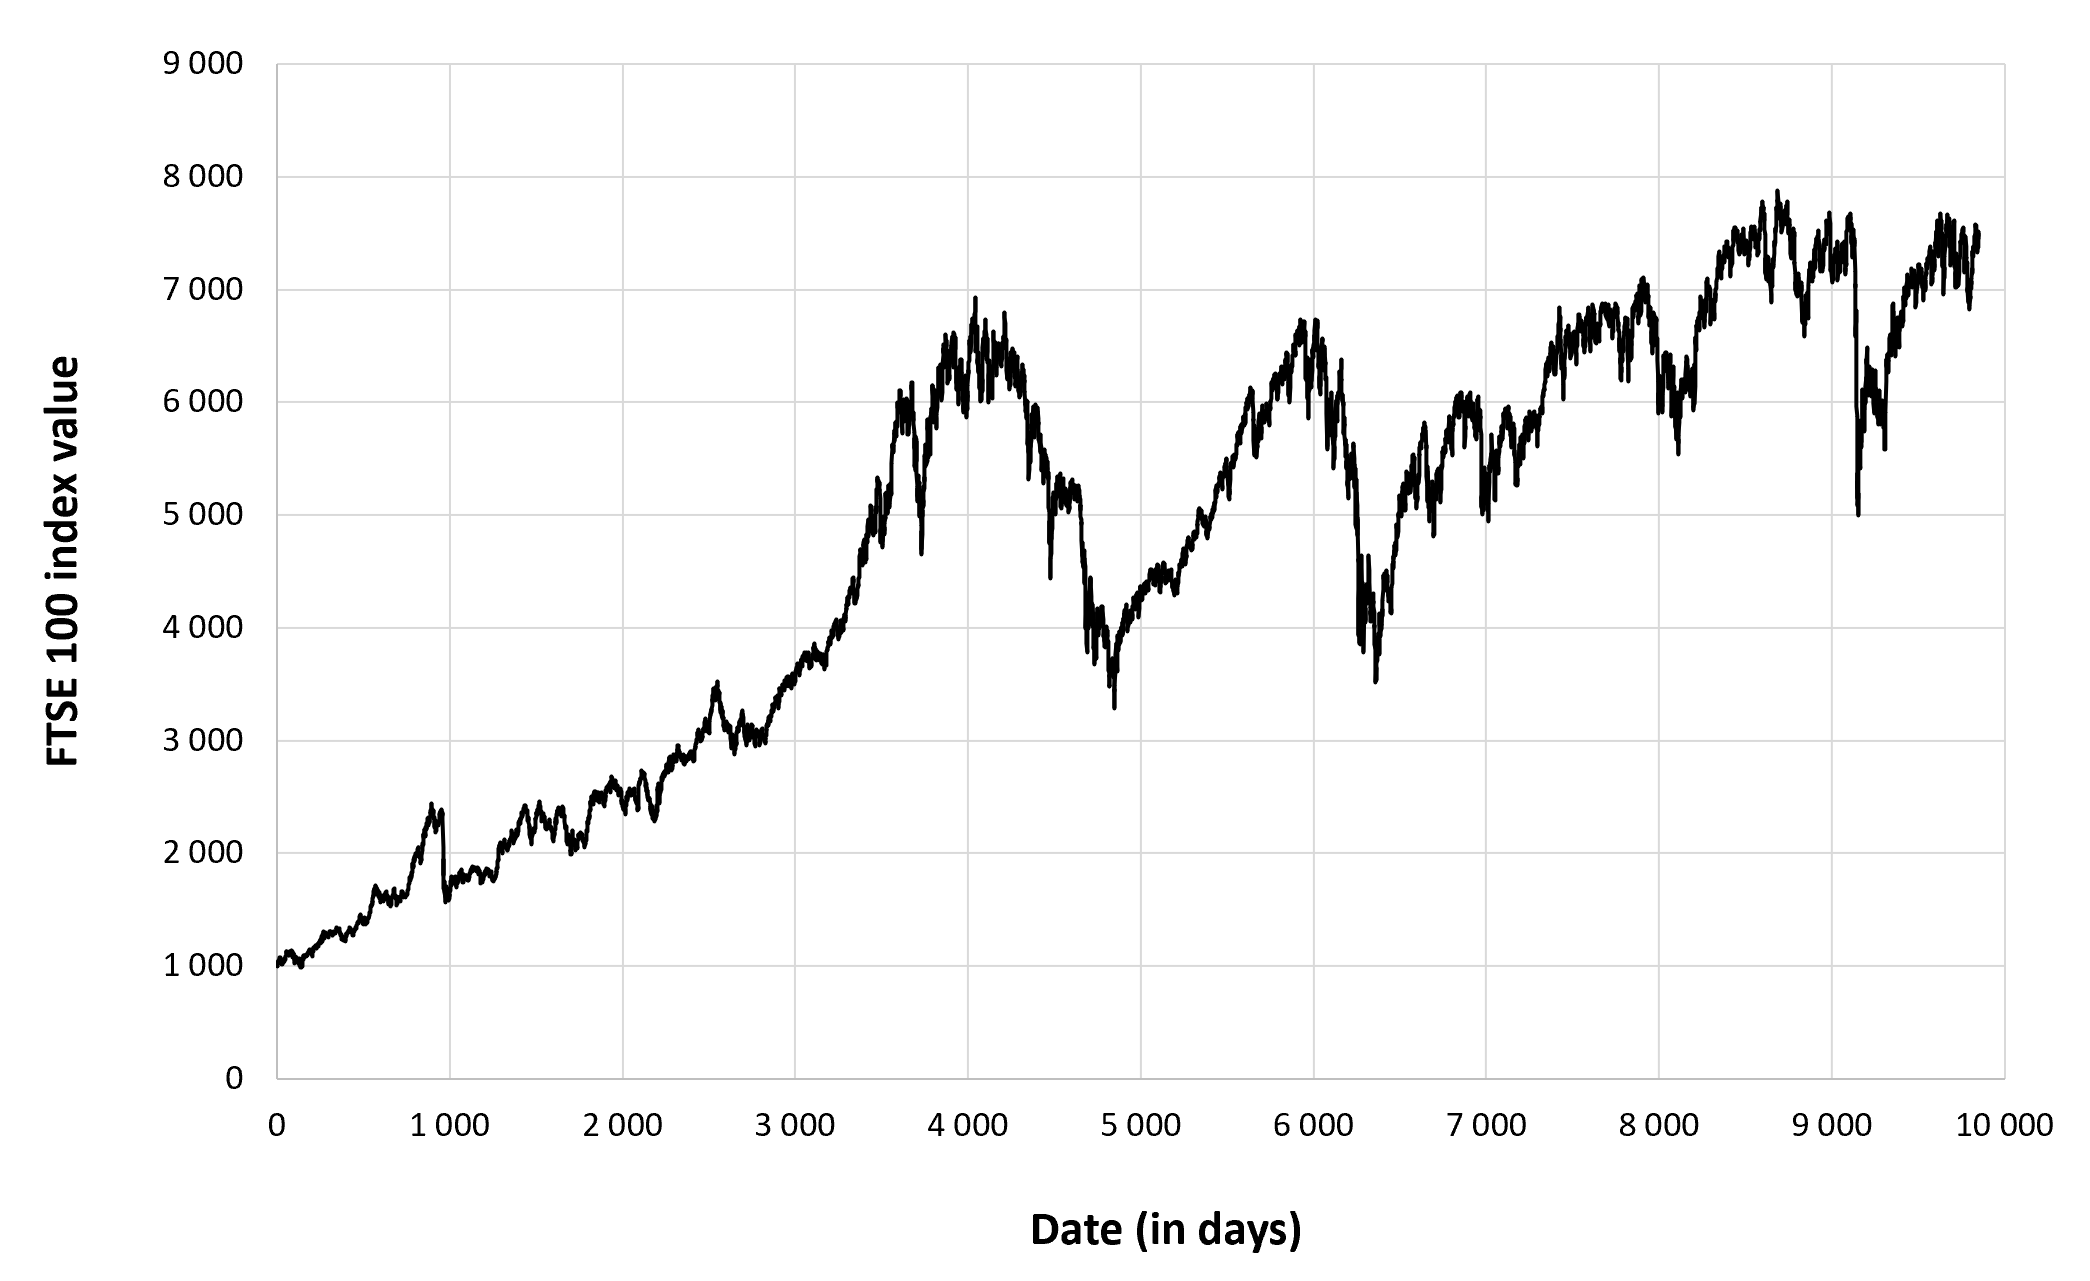 Evolution of the FTSE 100 index